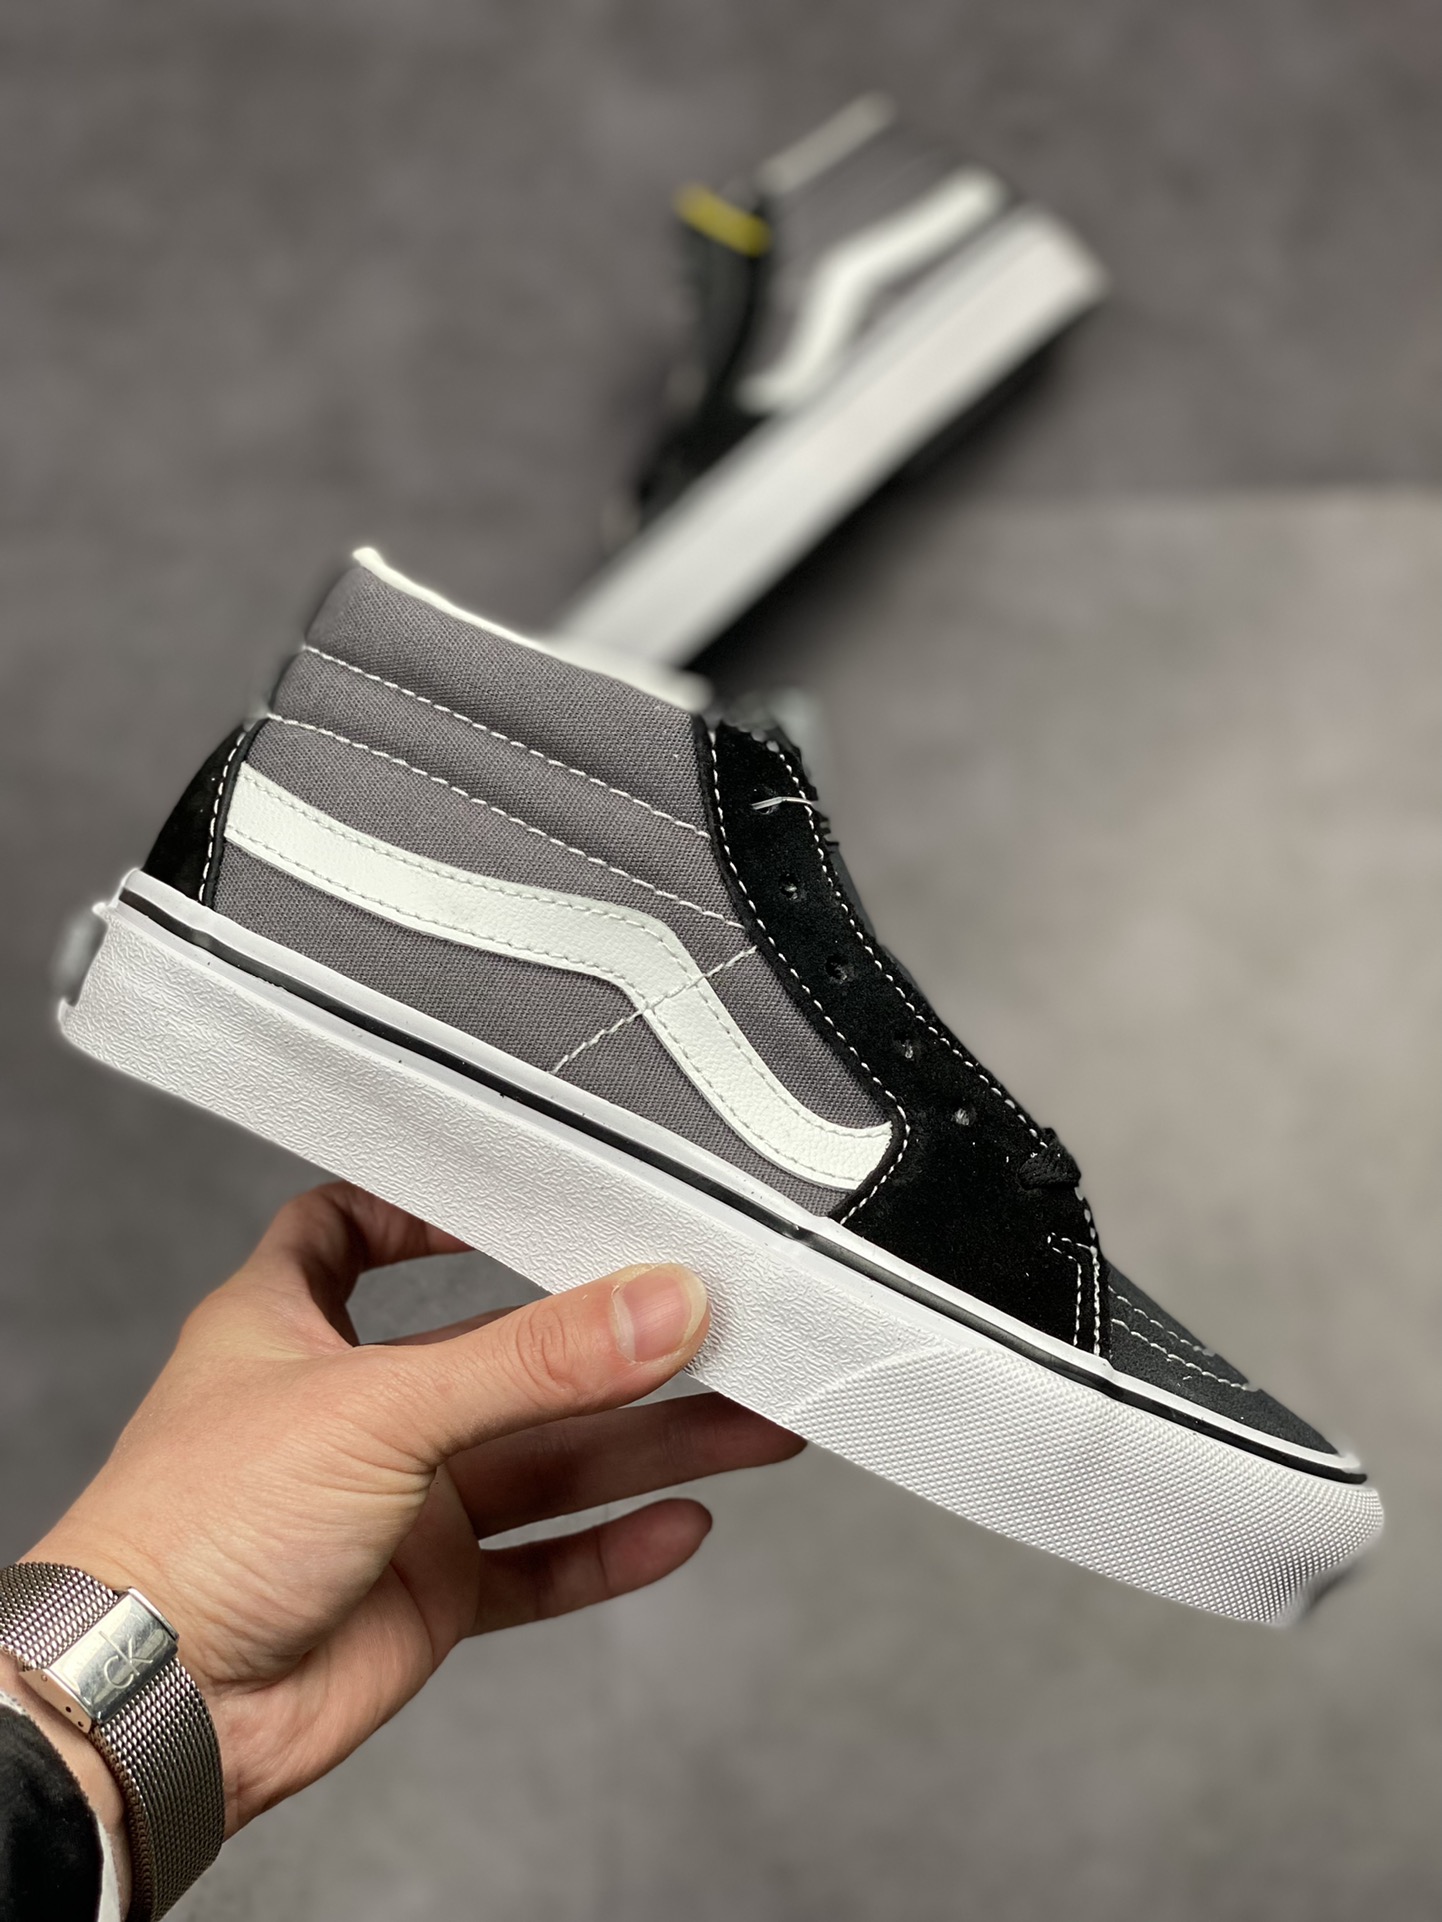 Vans SK8 Mid Vans black and gray color matching retro casual non-slip men's and women's mid-top canvas shoes skateboard shoes